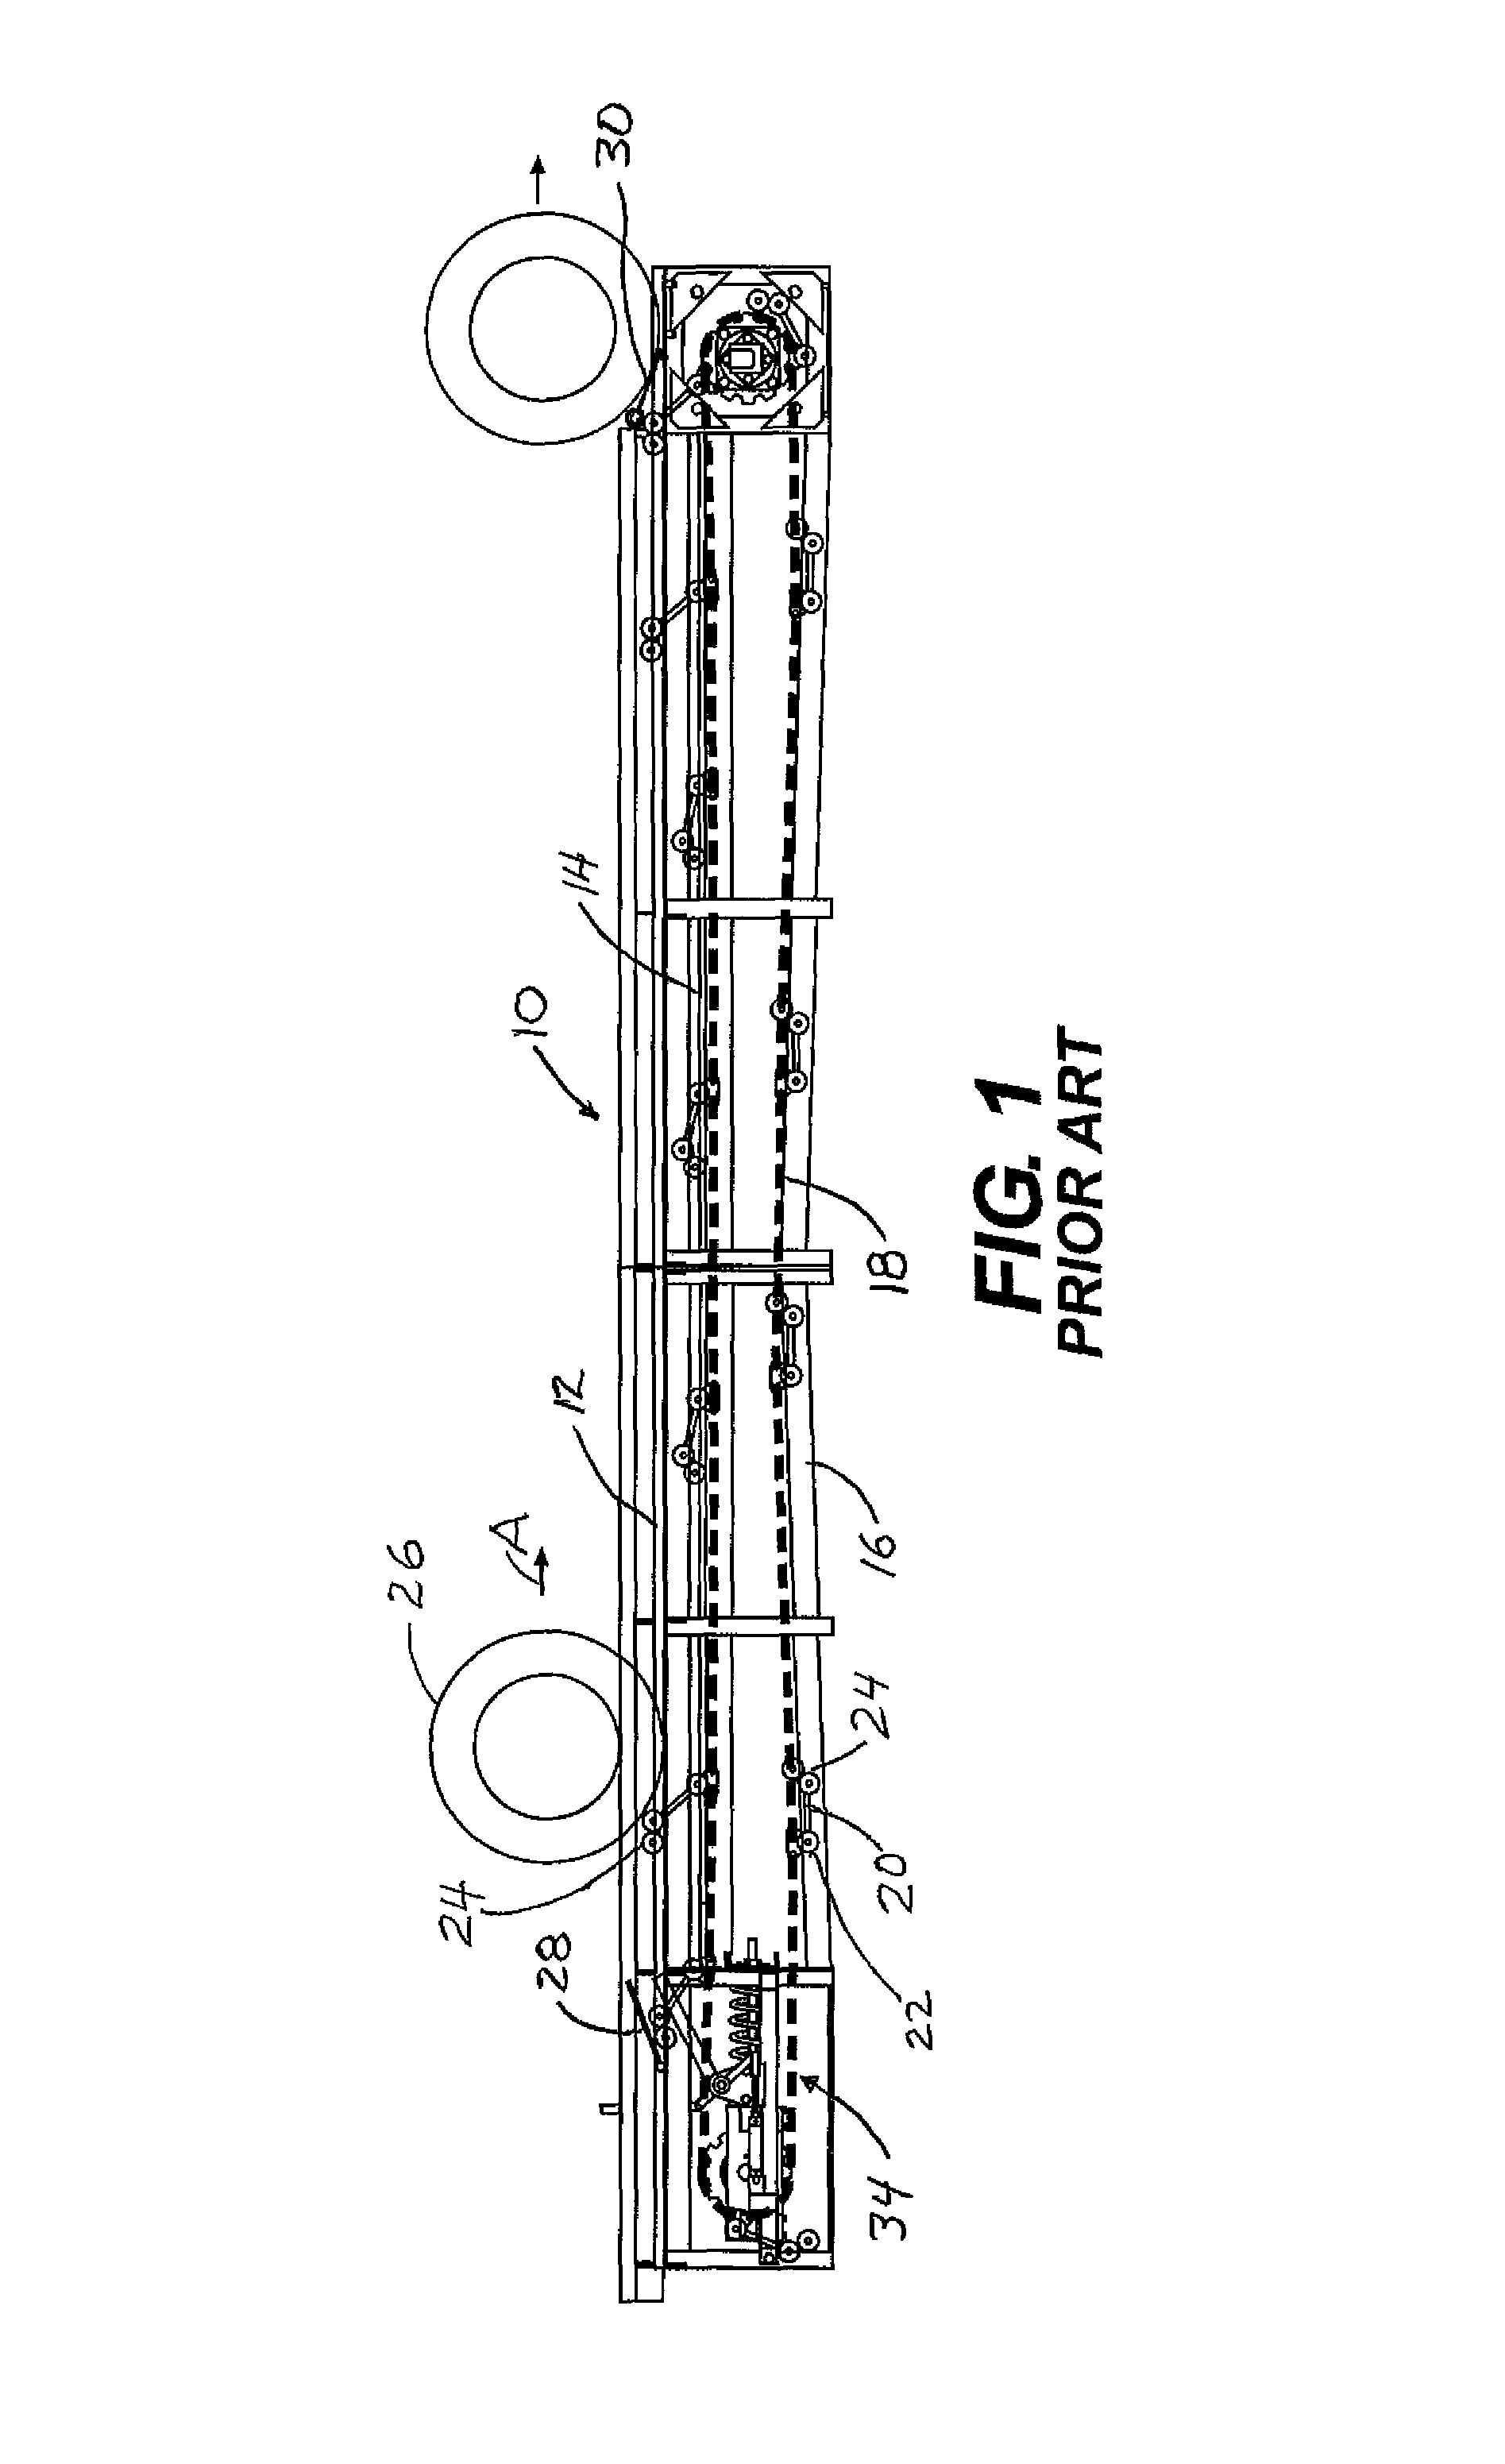 Roller assembly call up mechanism for a vehicle wash conveyor